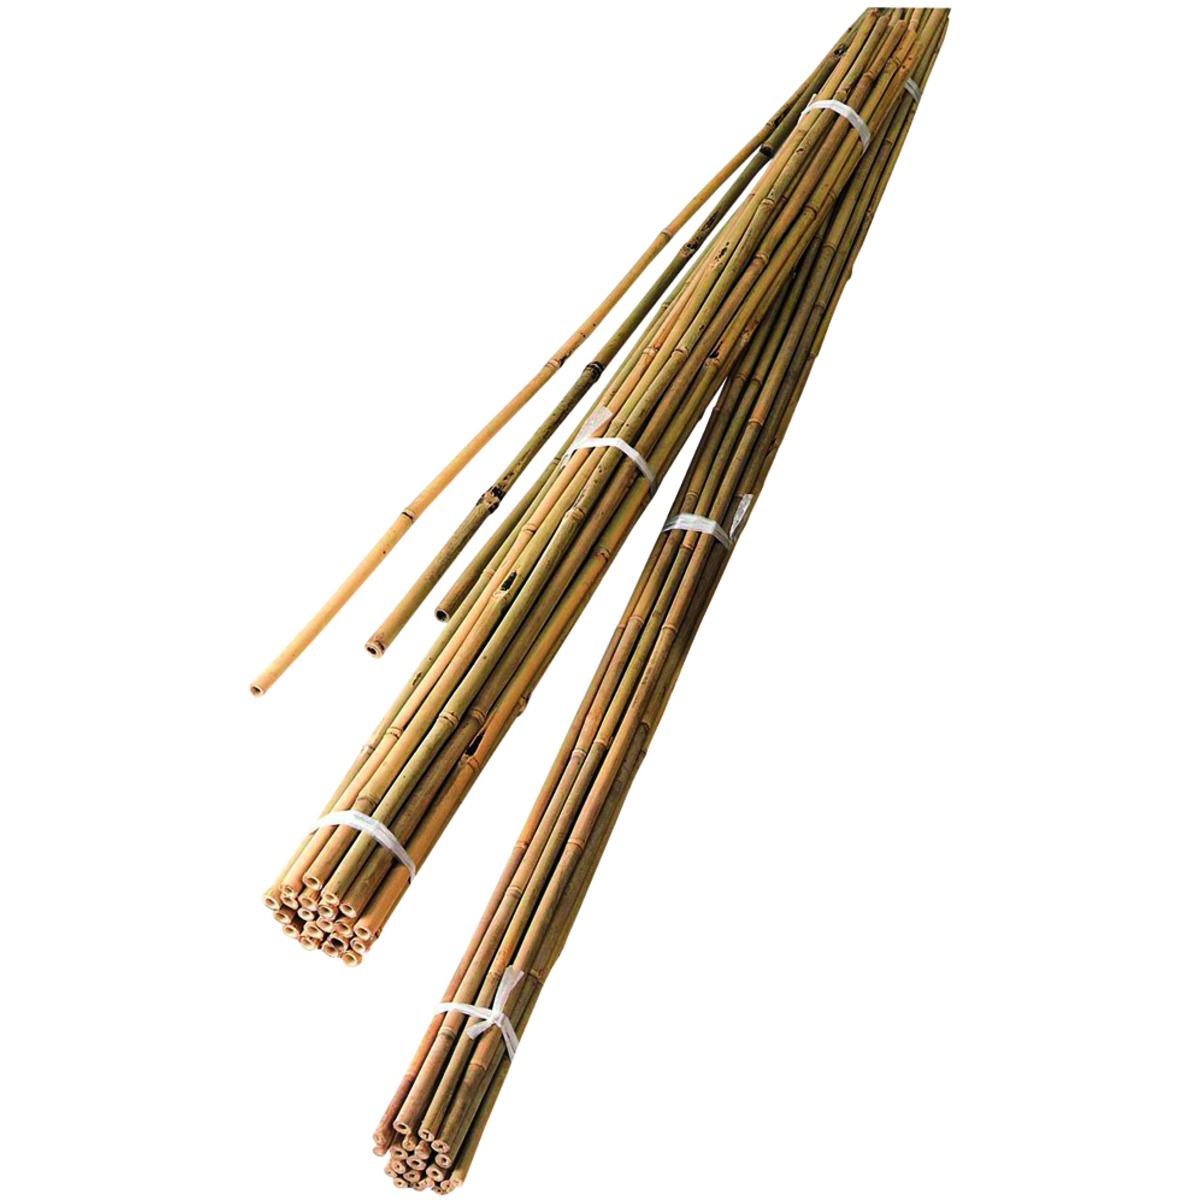 Image of Bamboo Canes 6ft 1.8m PK 10